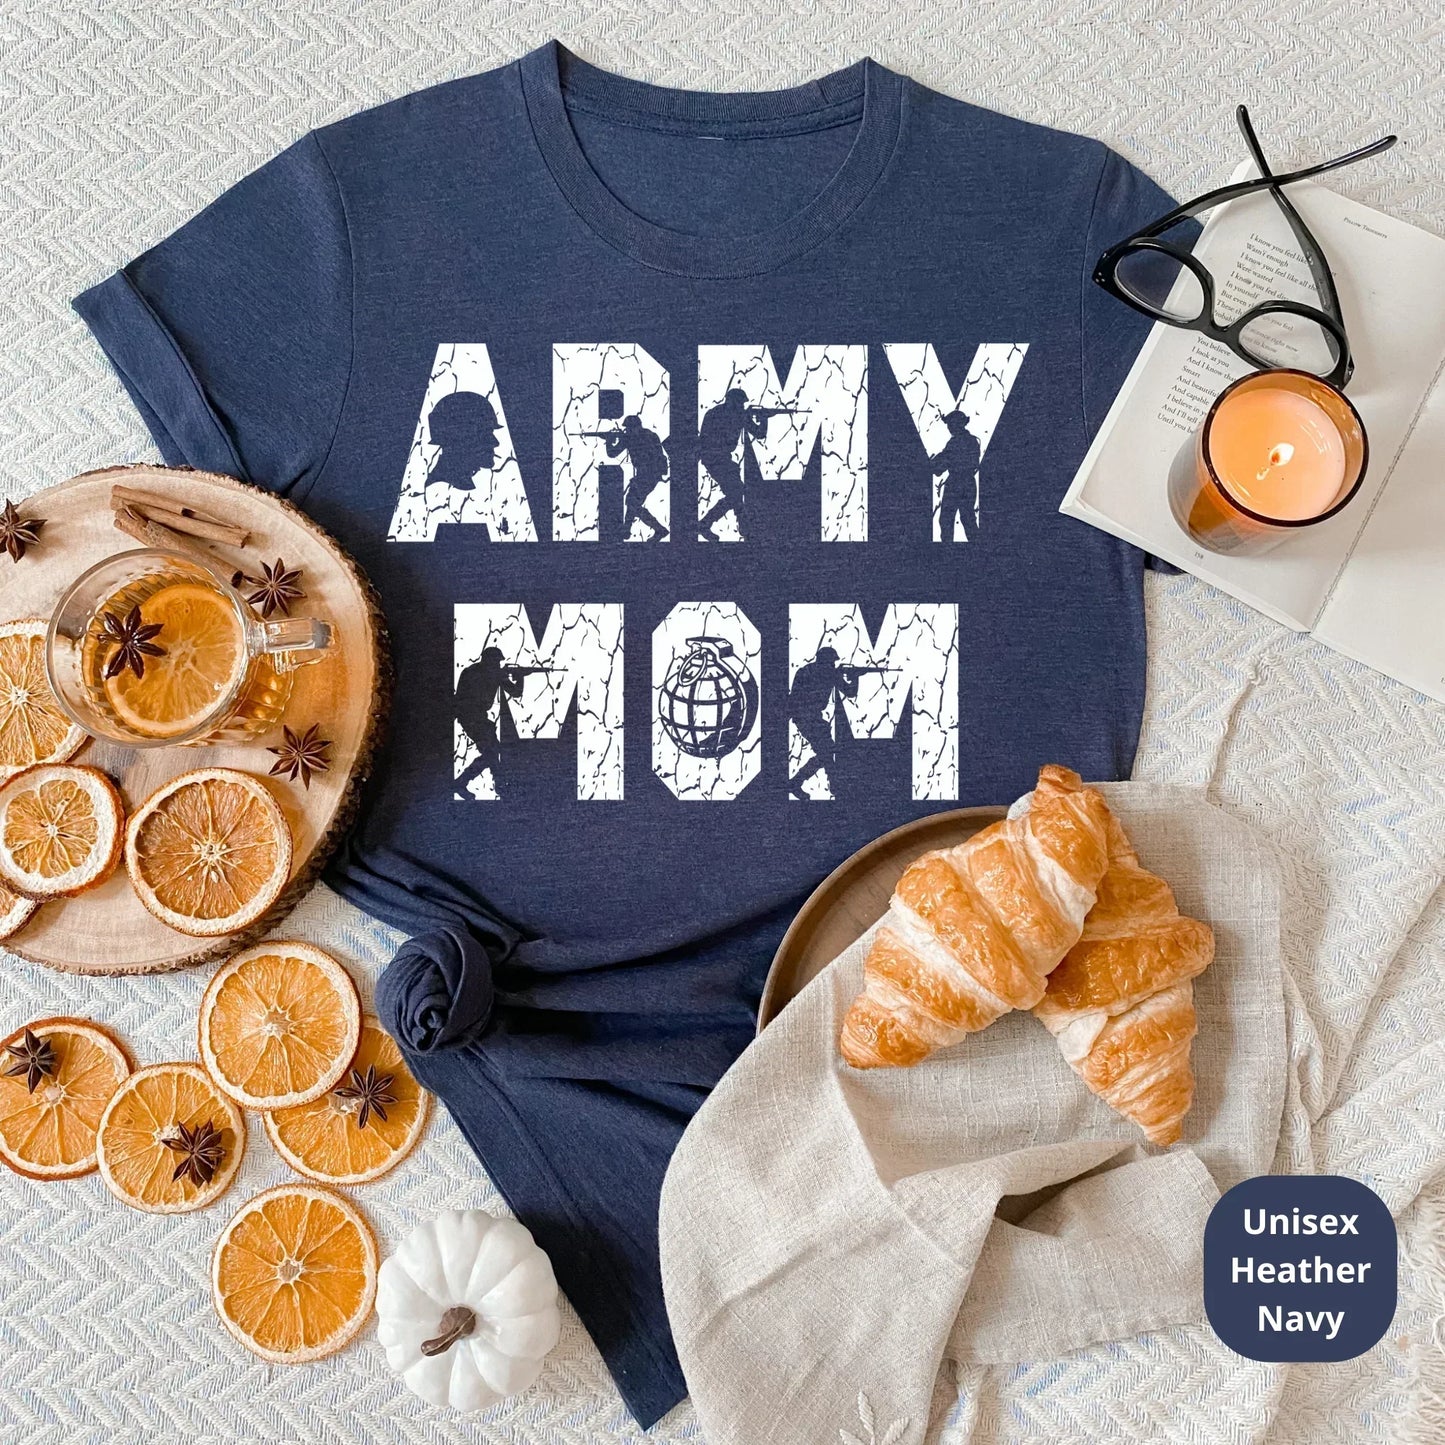 Army Mom Shirt, Military Mom Shirt, Proud Army Mom, Military Wife Sweatshirt, Army Mom Gift, Air Force Mom, Support our troops, Marine Coast guard, Navy Mom